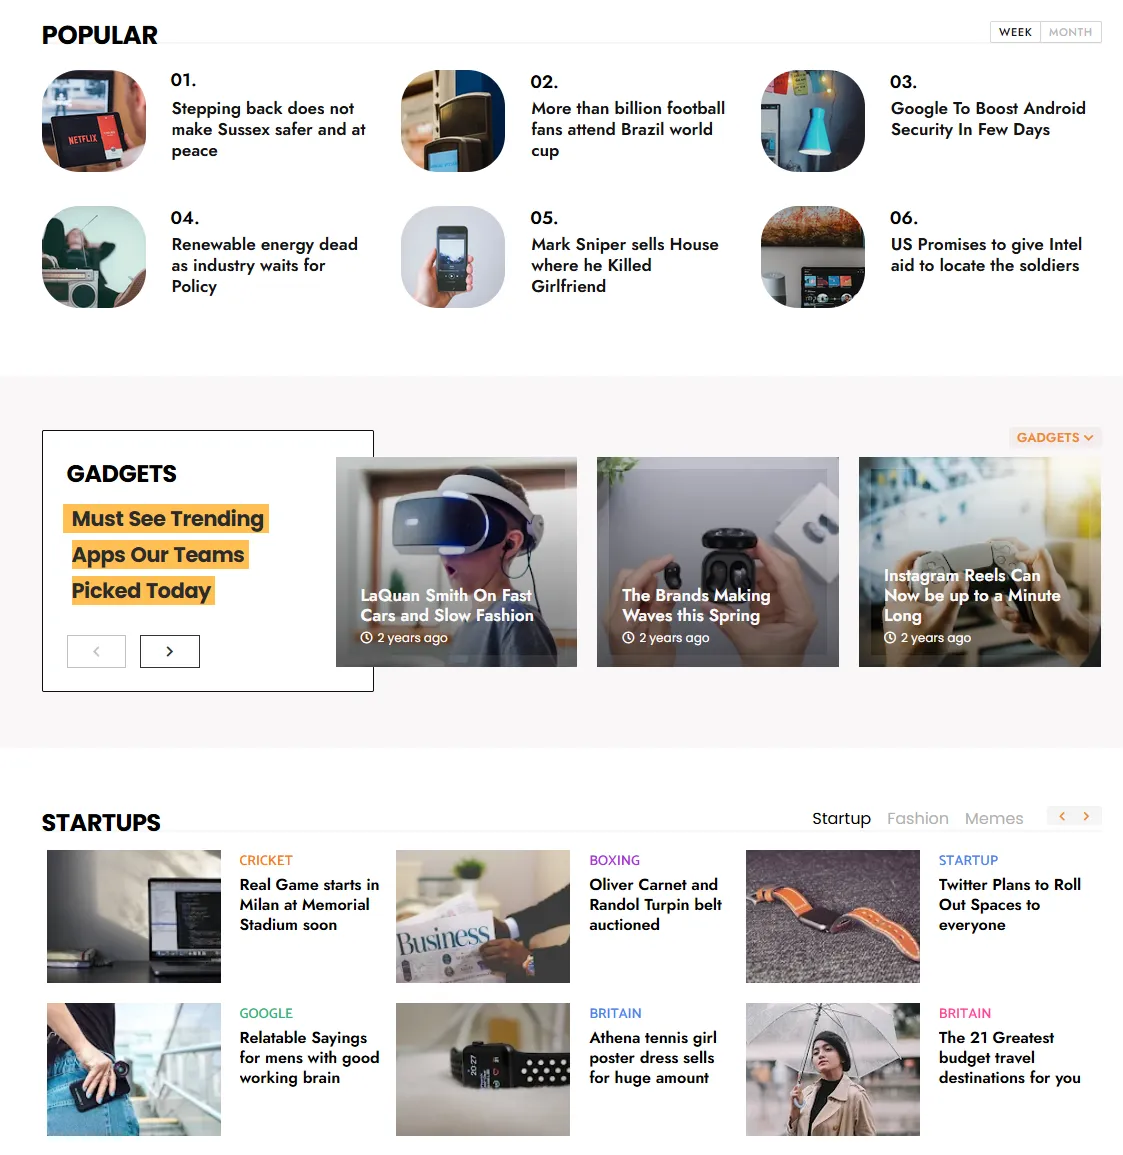 Popular module, gadgets module, and Startup module on Story Mag homepage